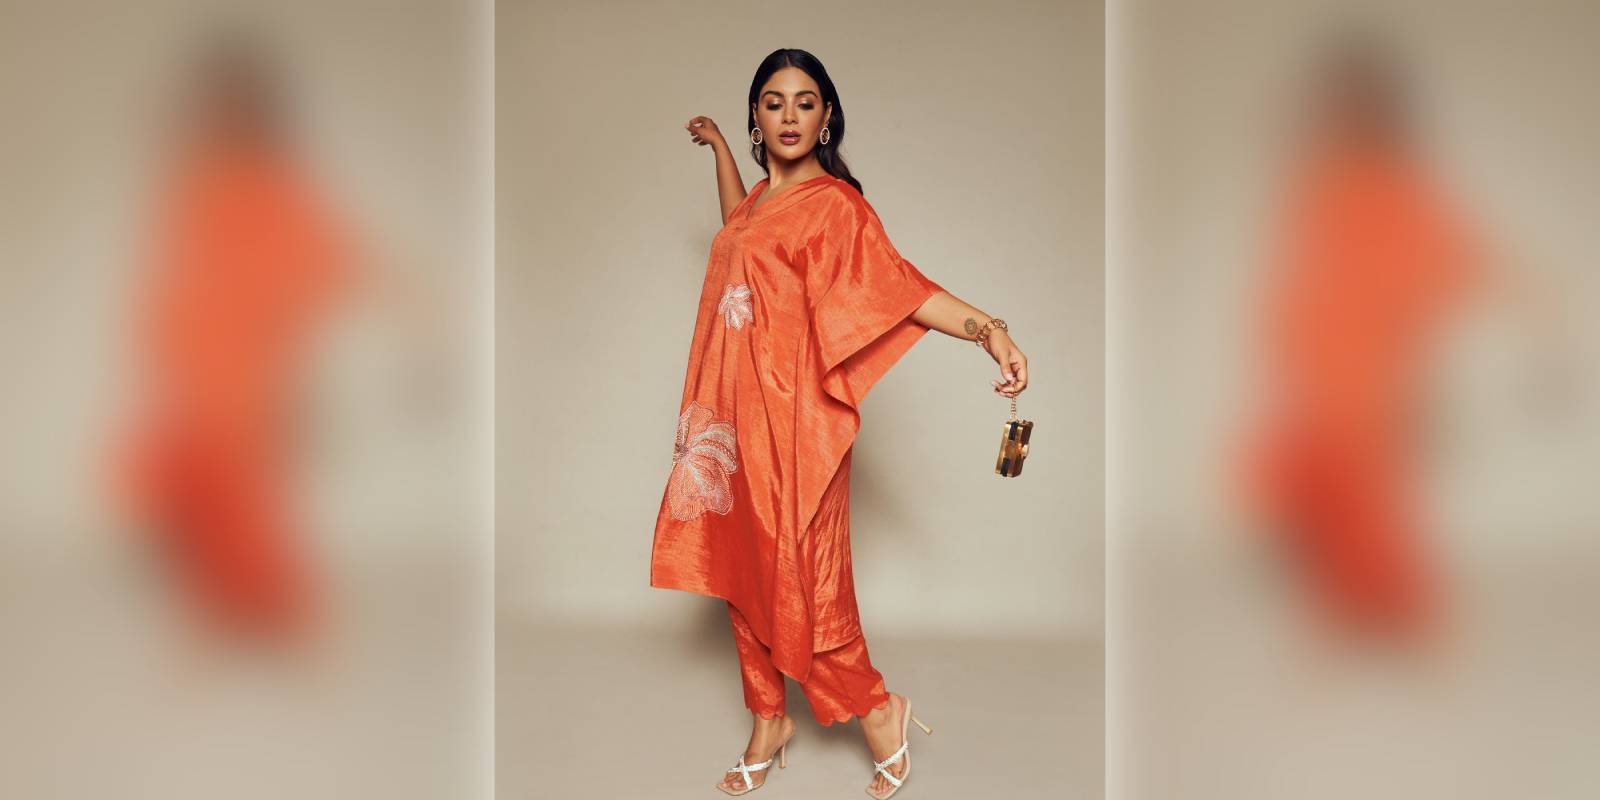 Gallery of actor Samyuktha, who shines in this orange outfit